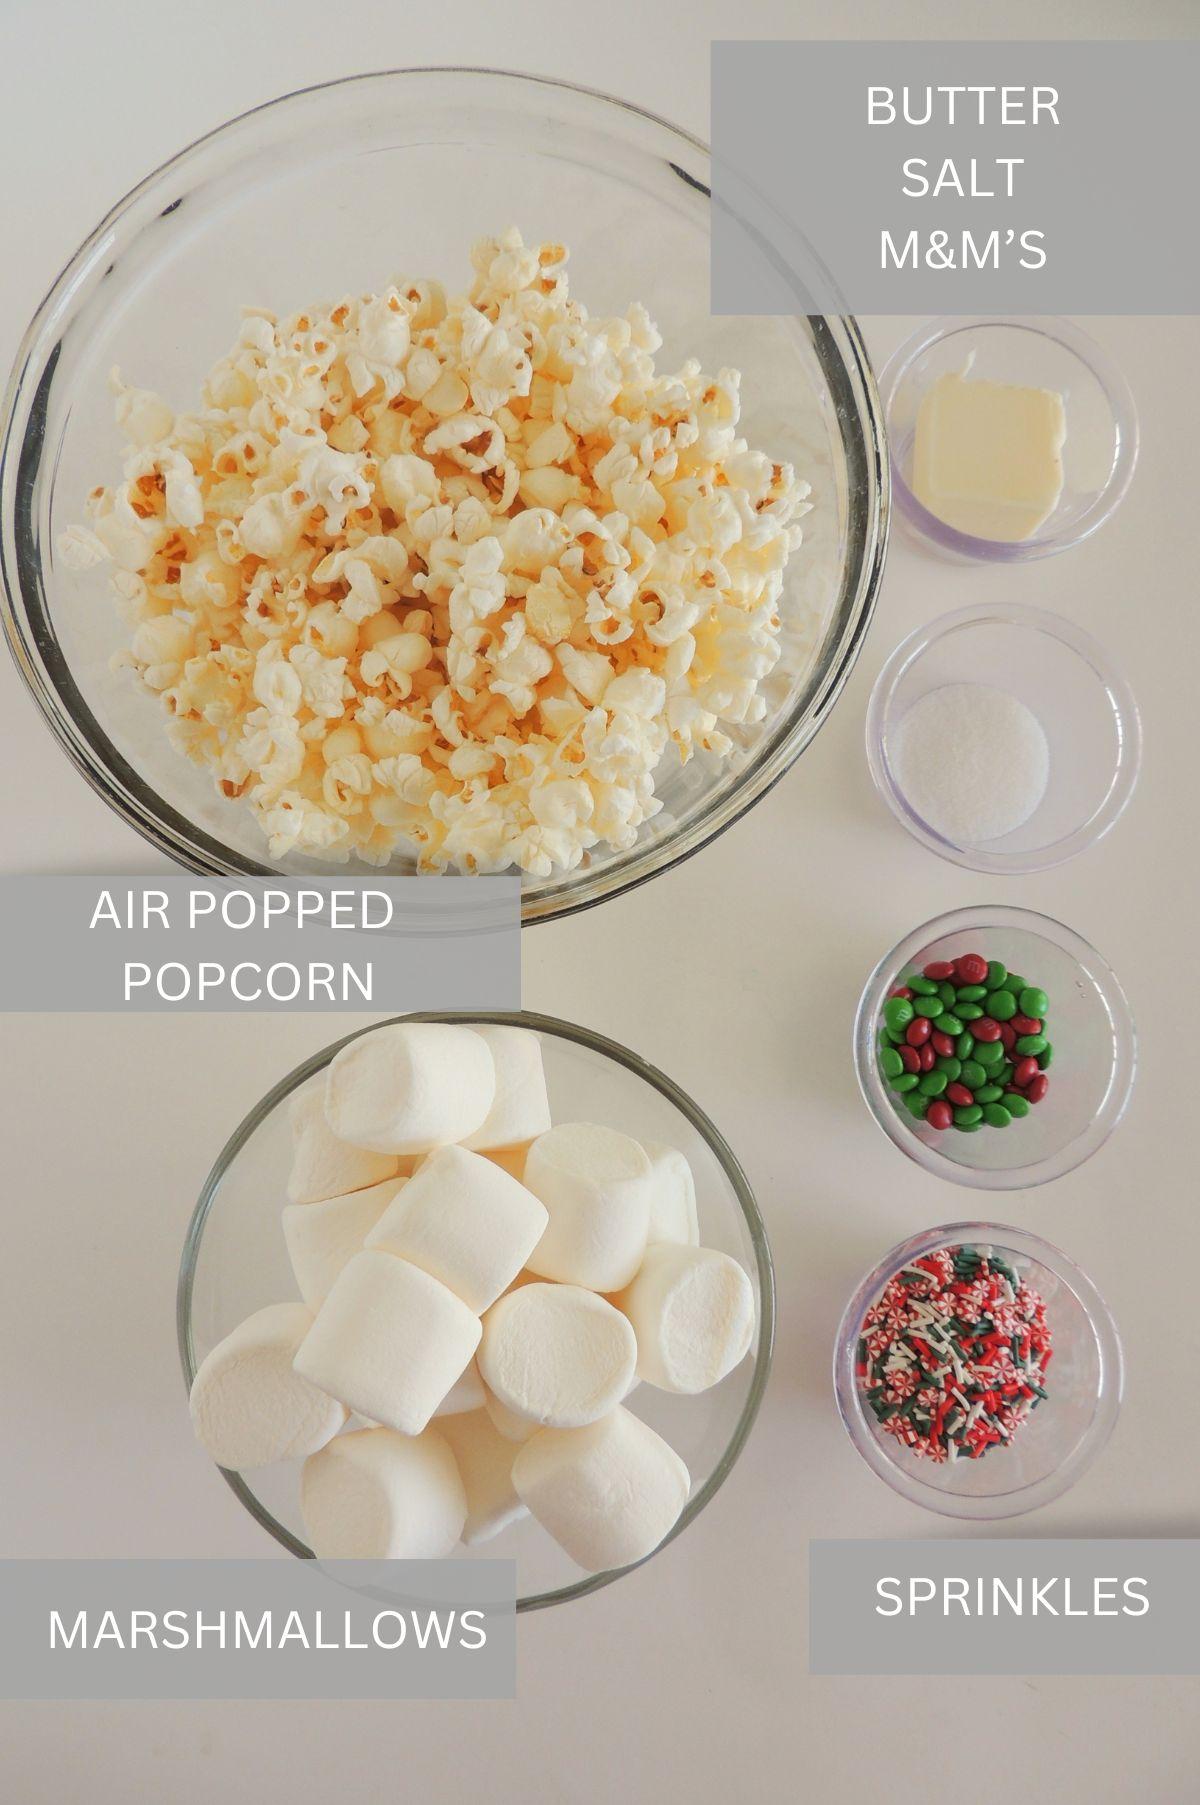 Ingredients for easy Christmas popcorn